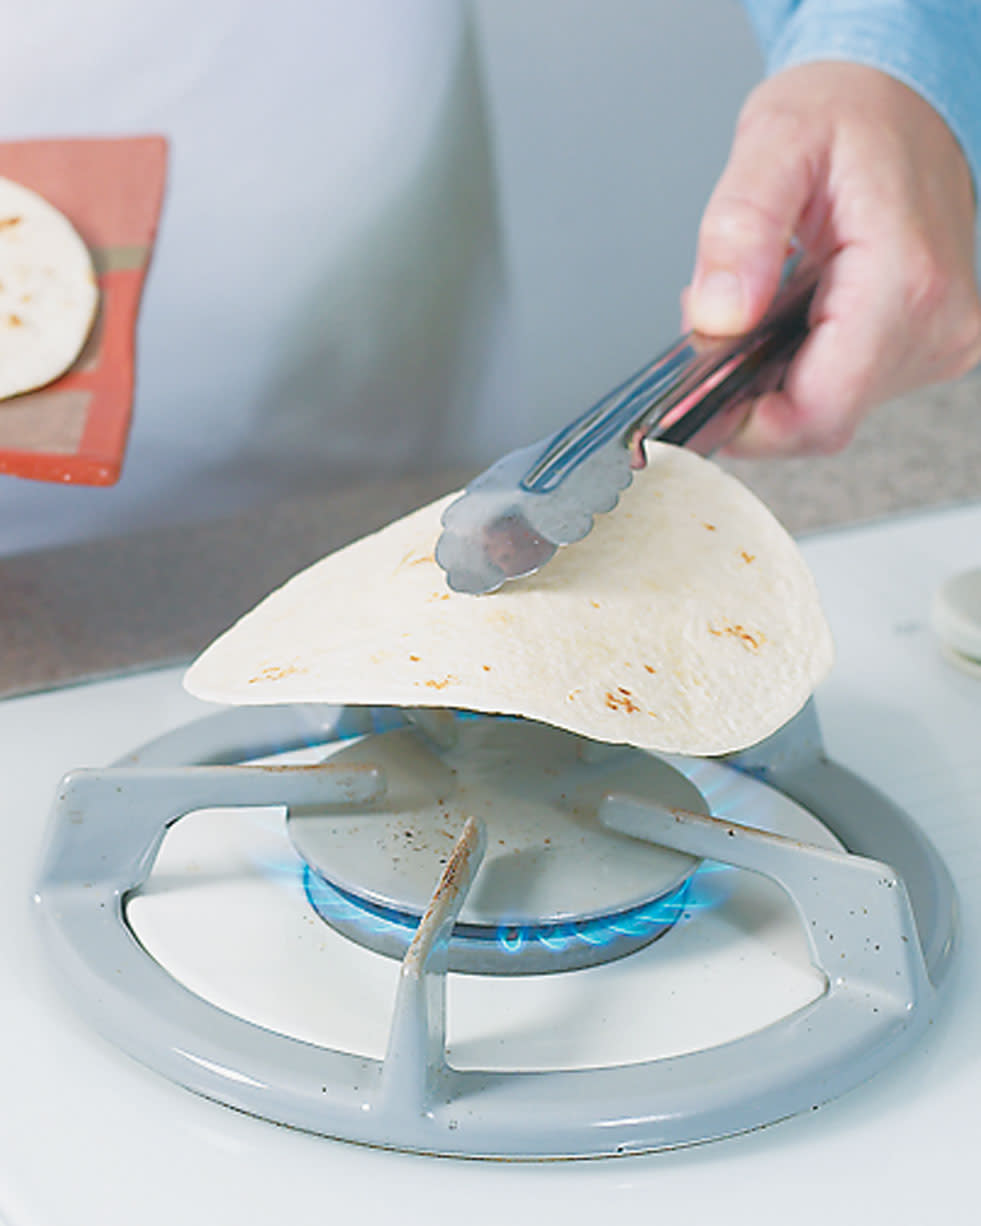 Can You Toast Your Tortilla In the Toaster?